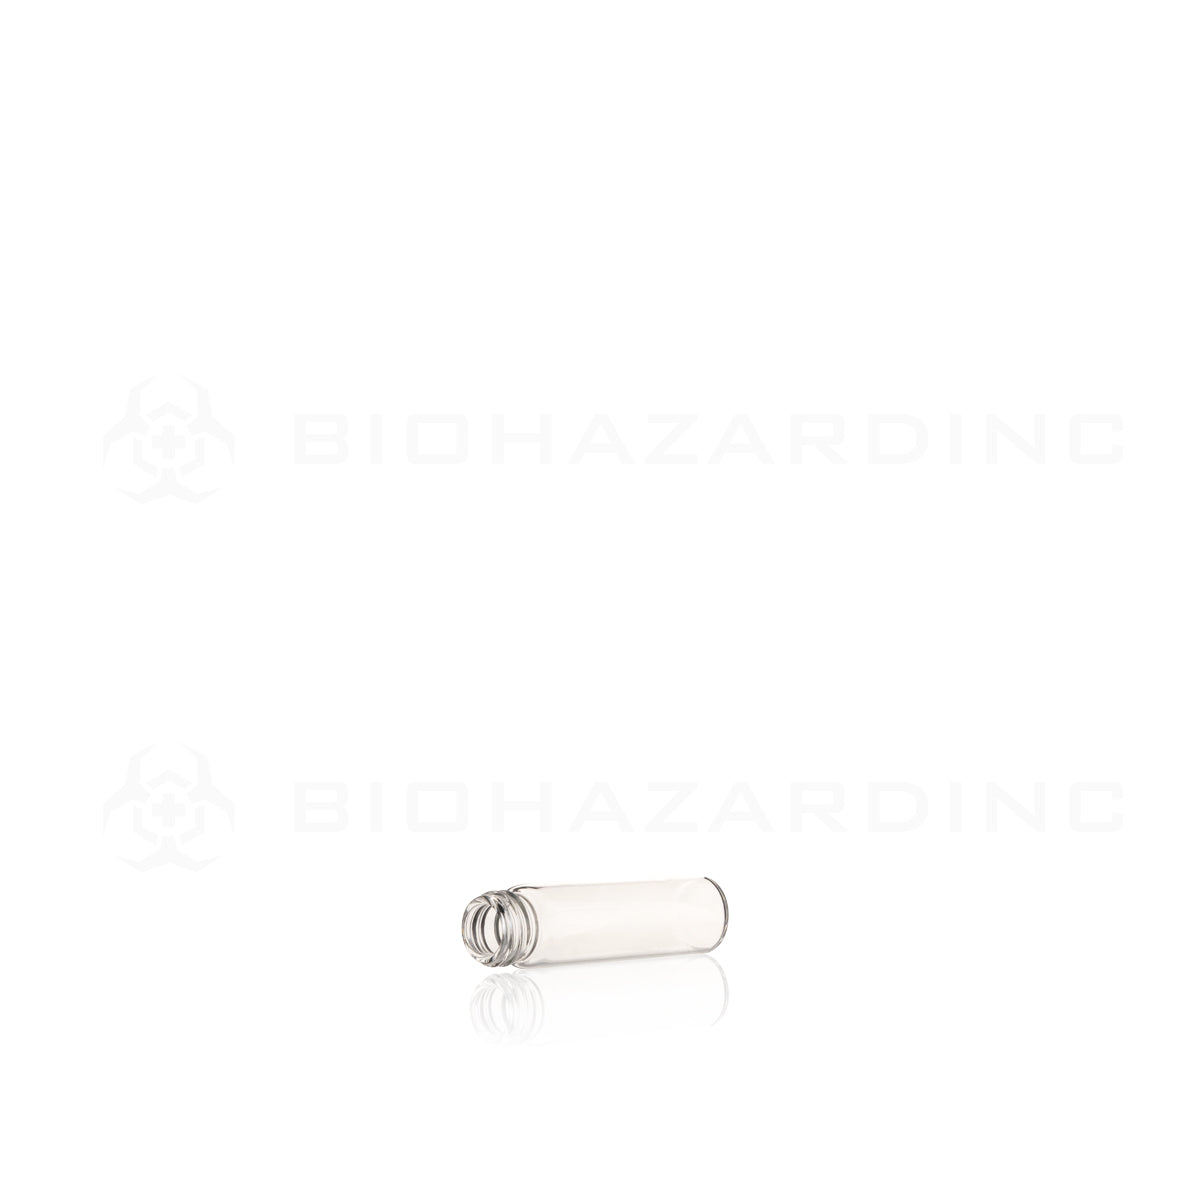 Glass Vial | Glass Vial 60mm Clear | 15mm - 2 DR - 371 Count Glass Vial Biohazard Inc   